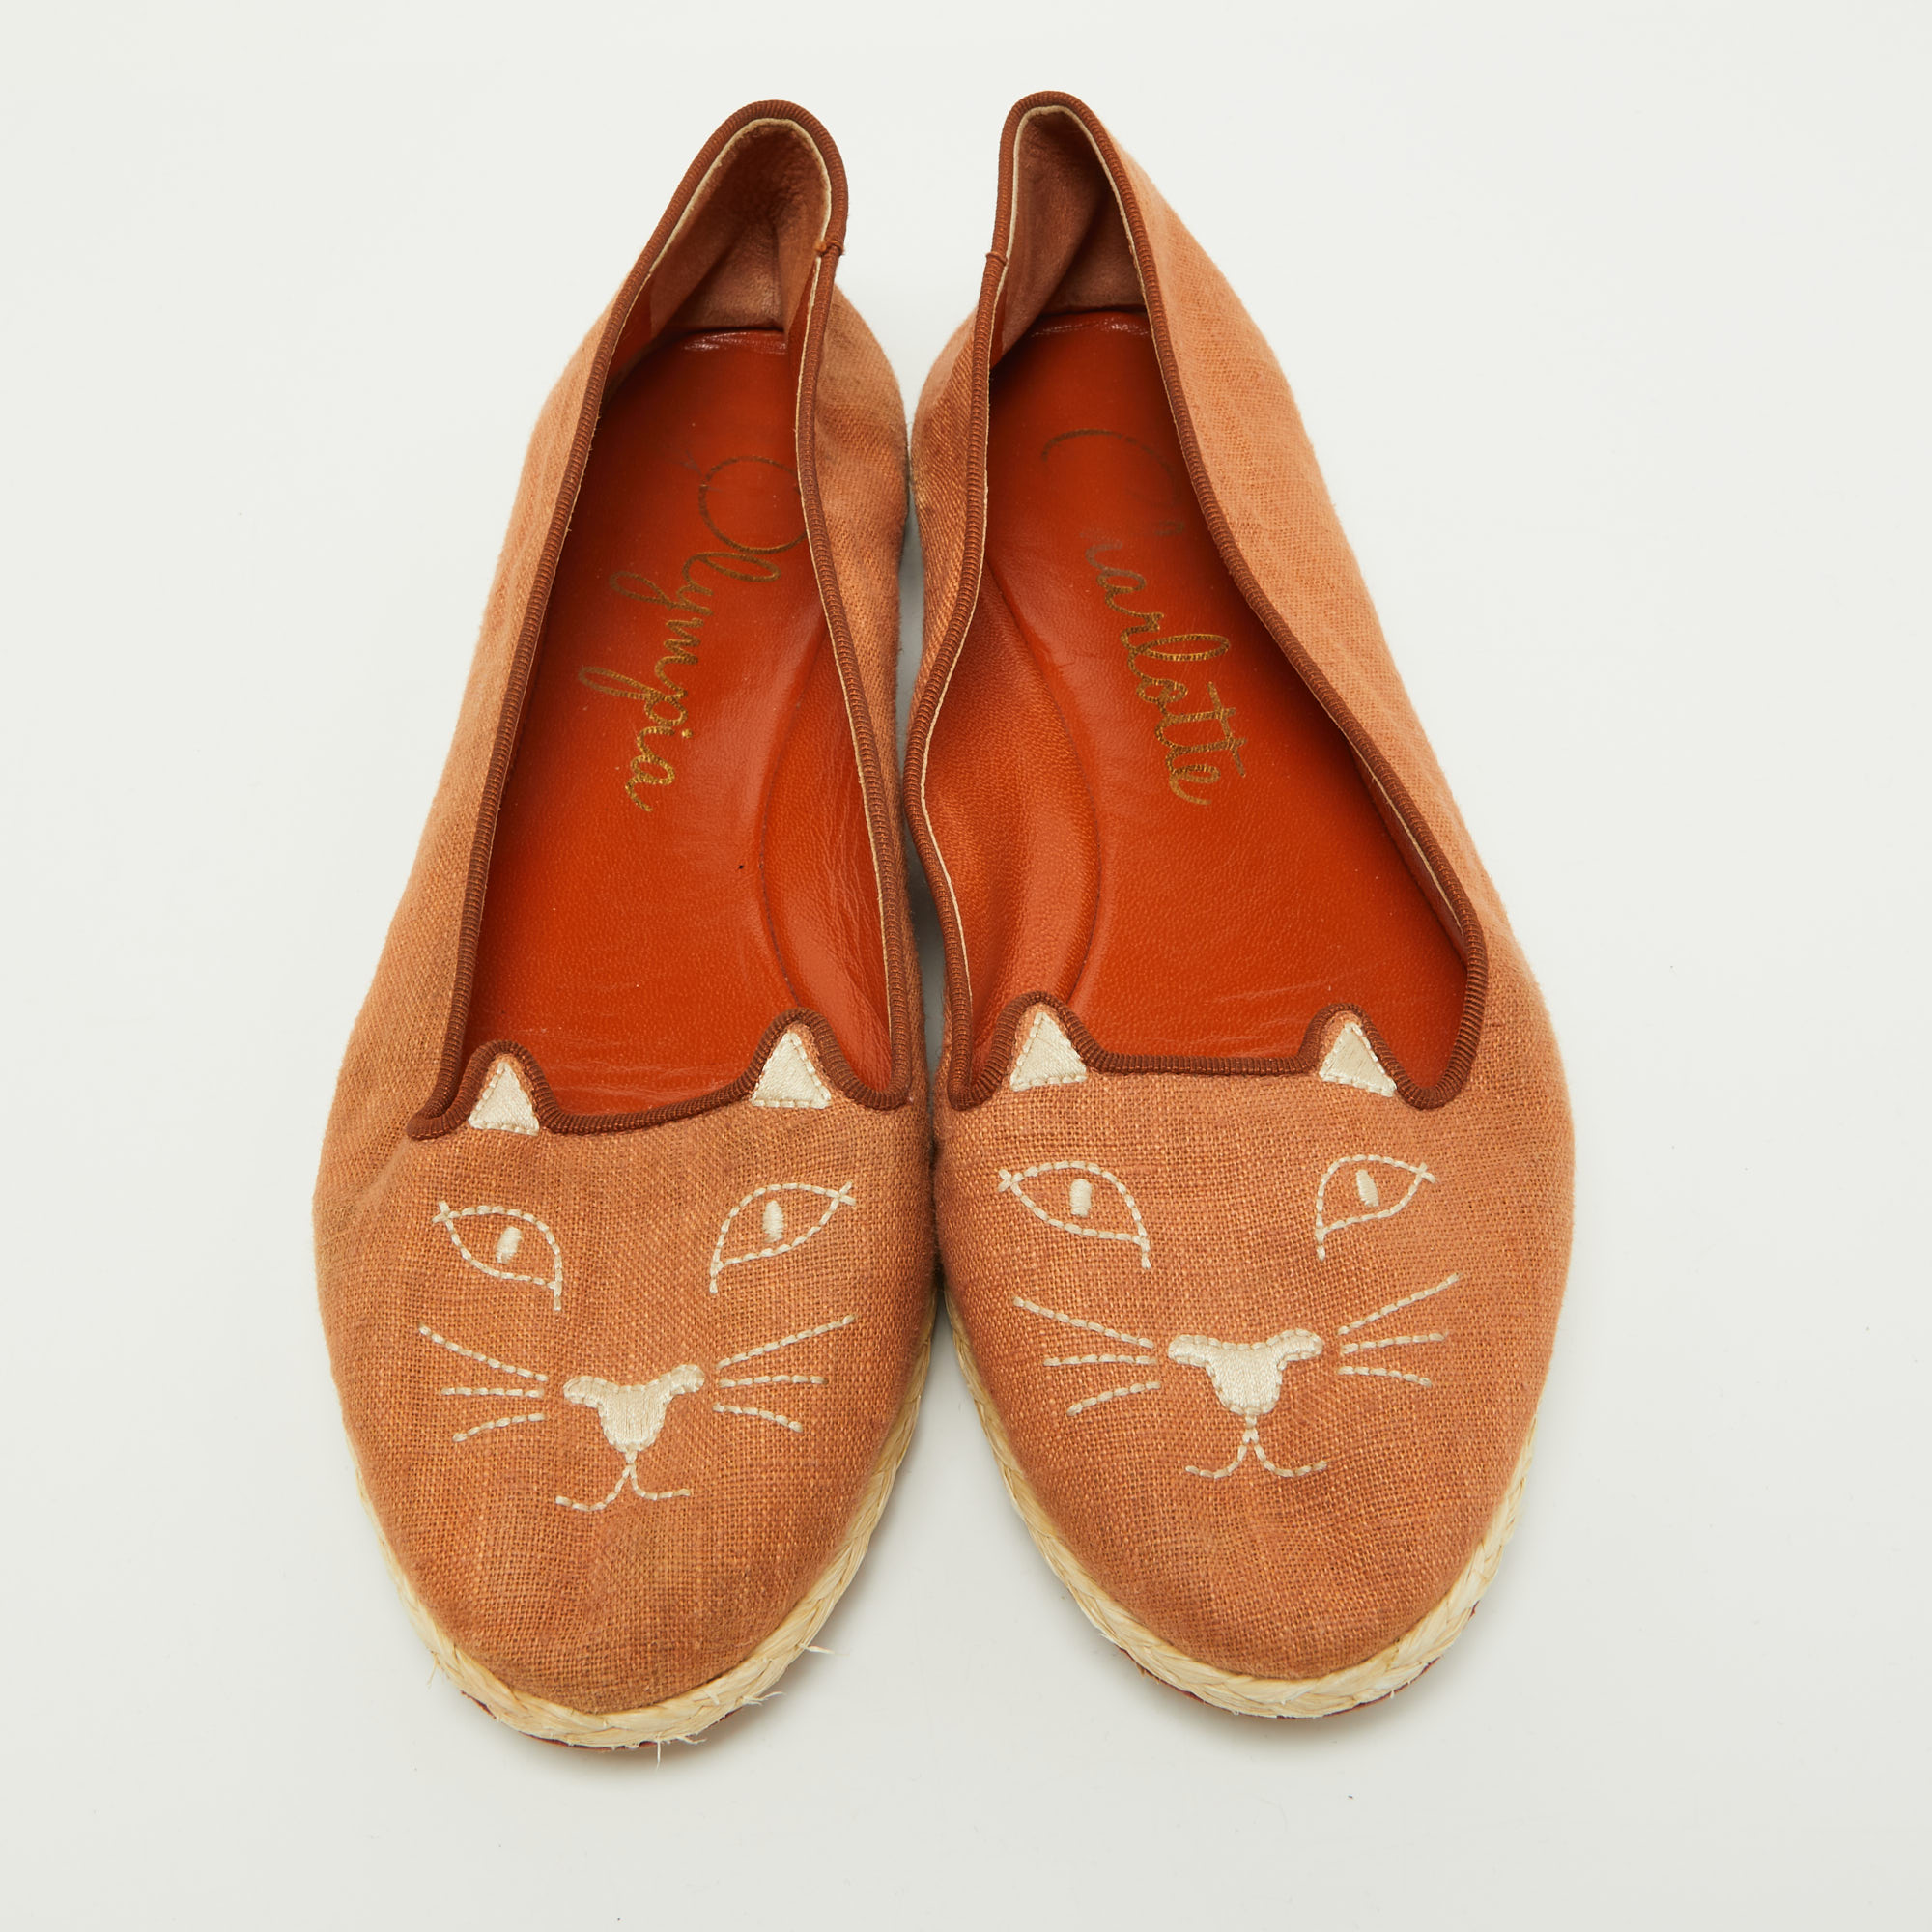 Charlotte Olympia Brown Canvas Espadrilles Flats Size 37